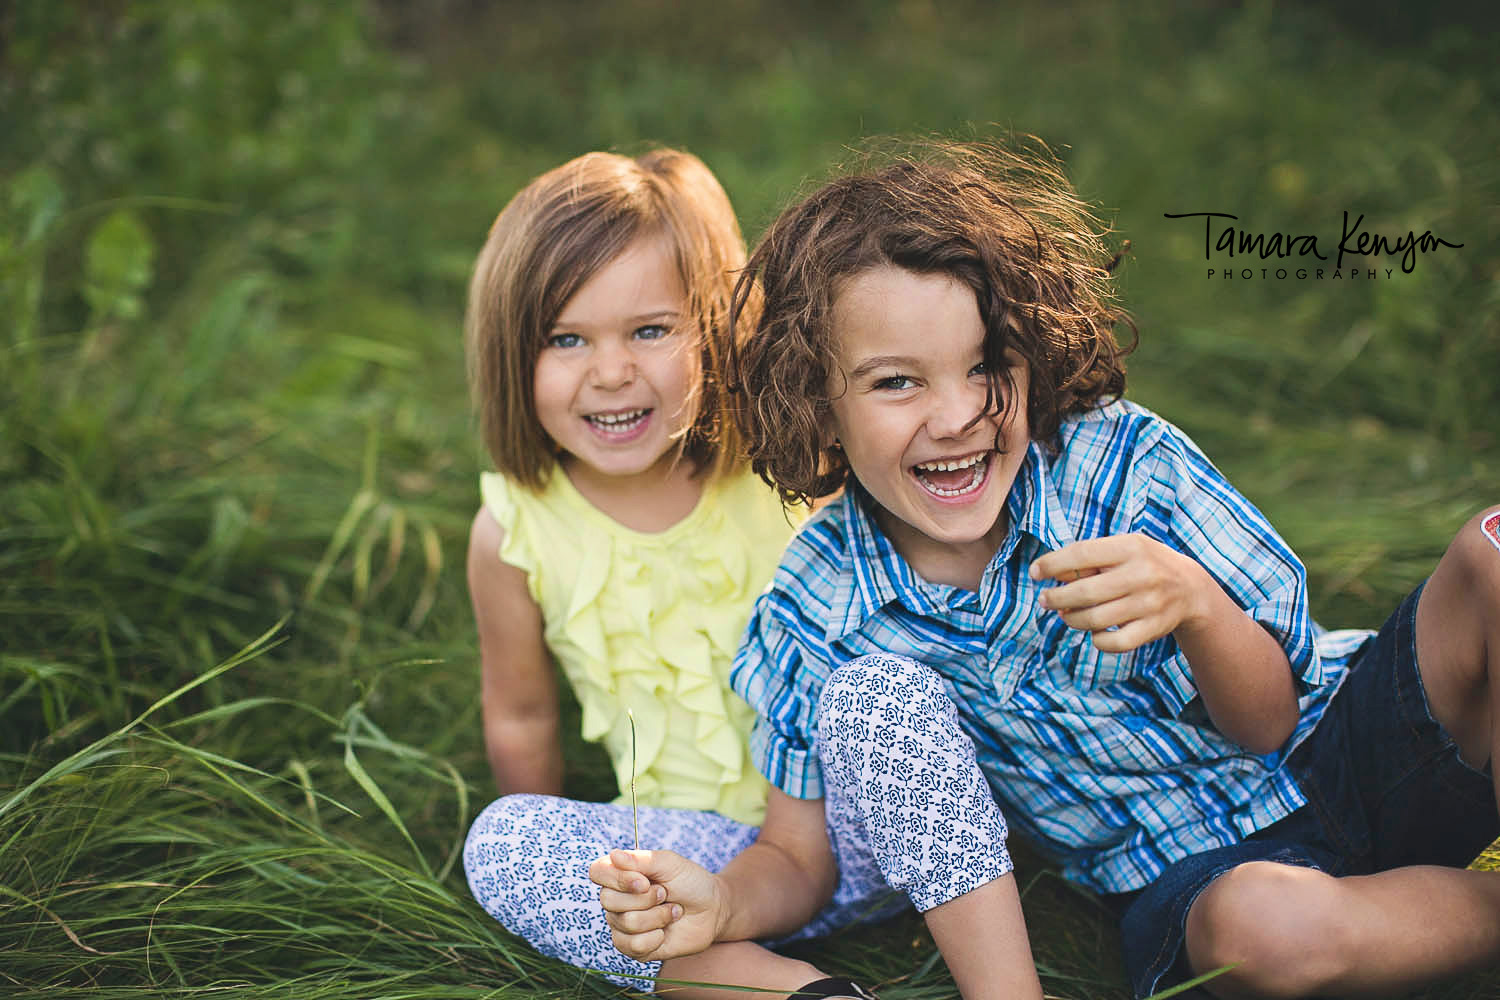 child photographer in boise